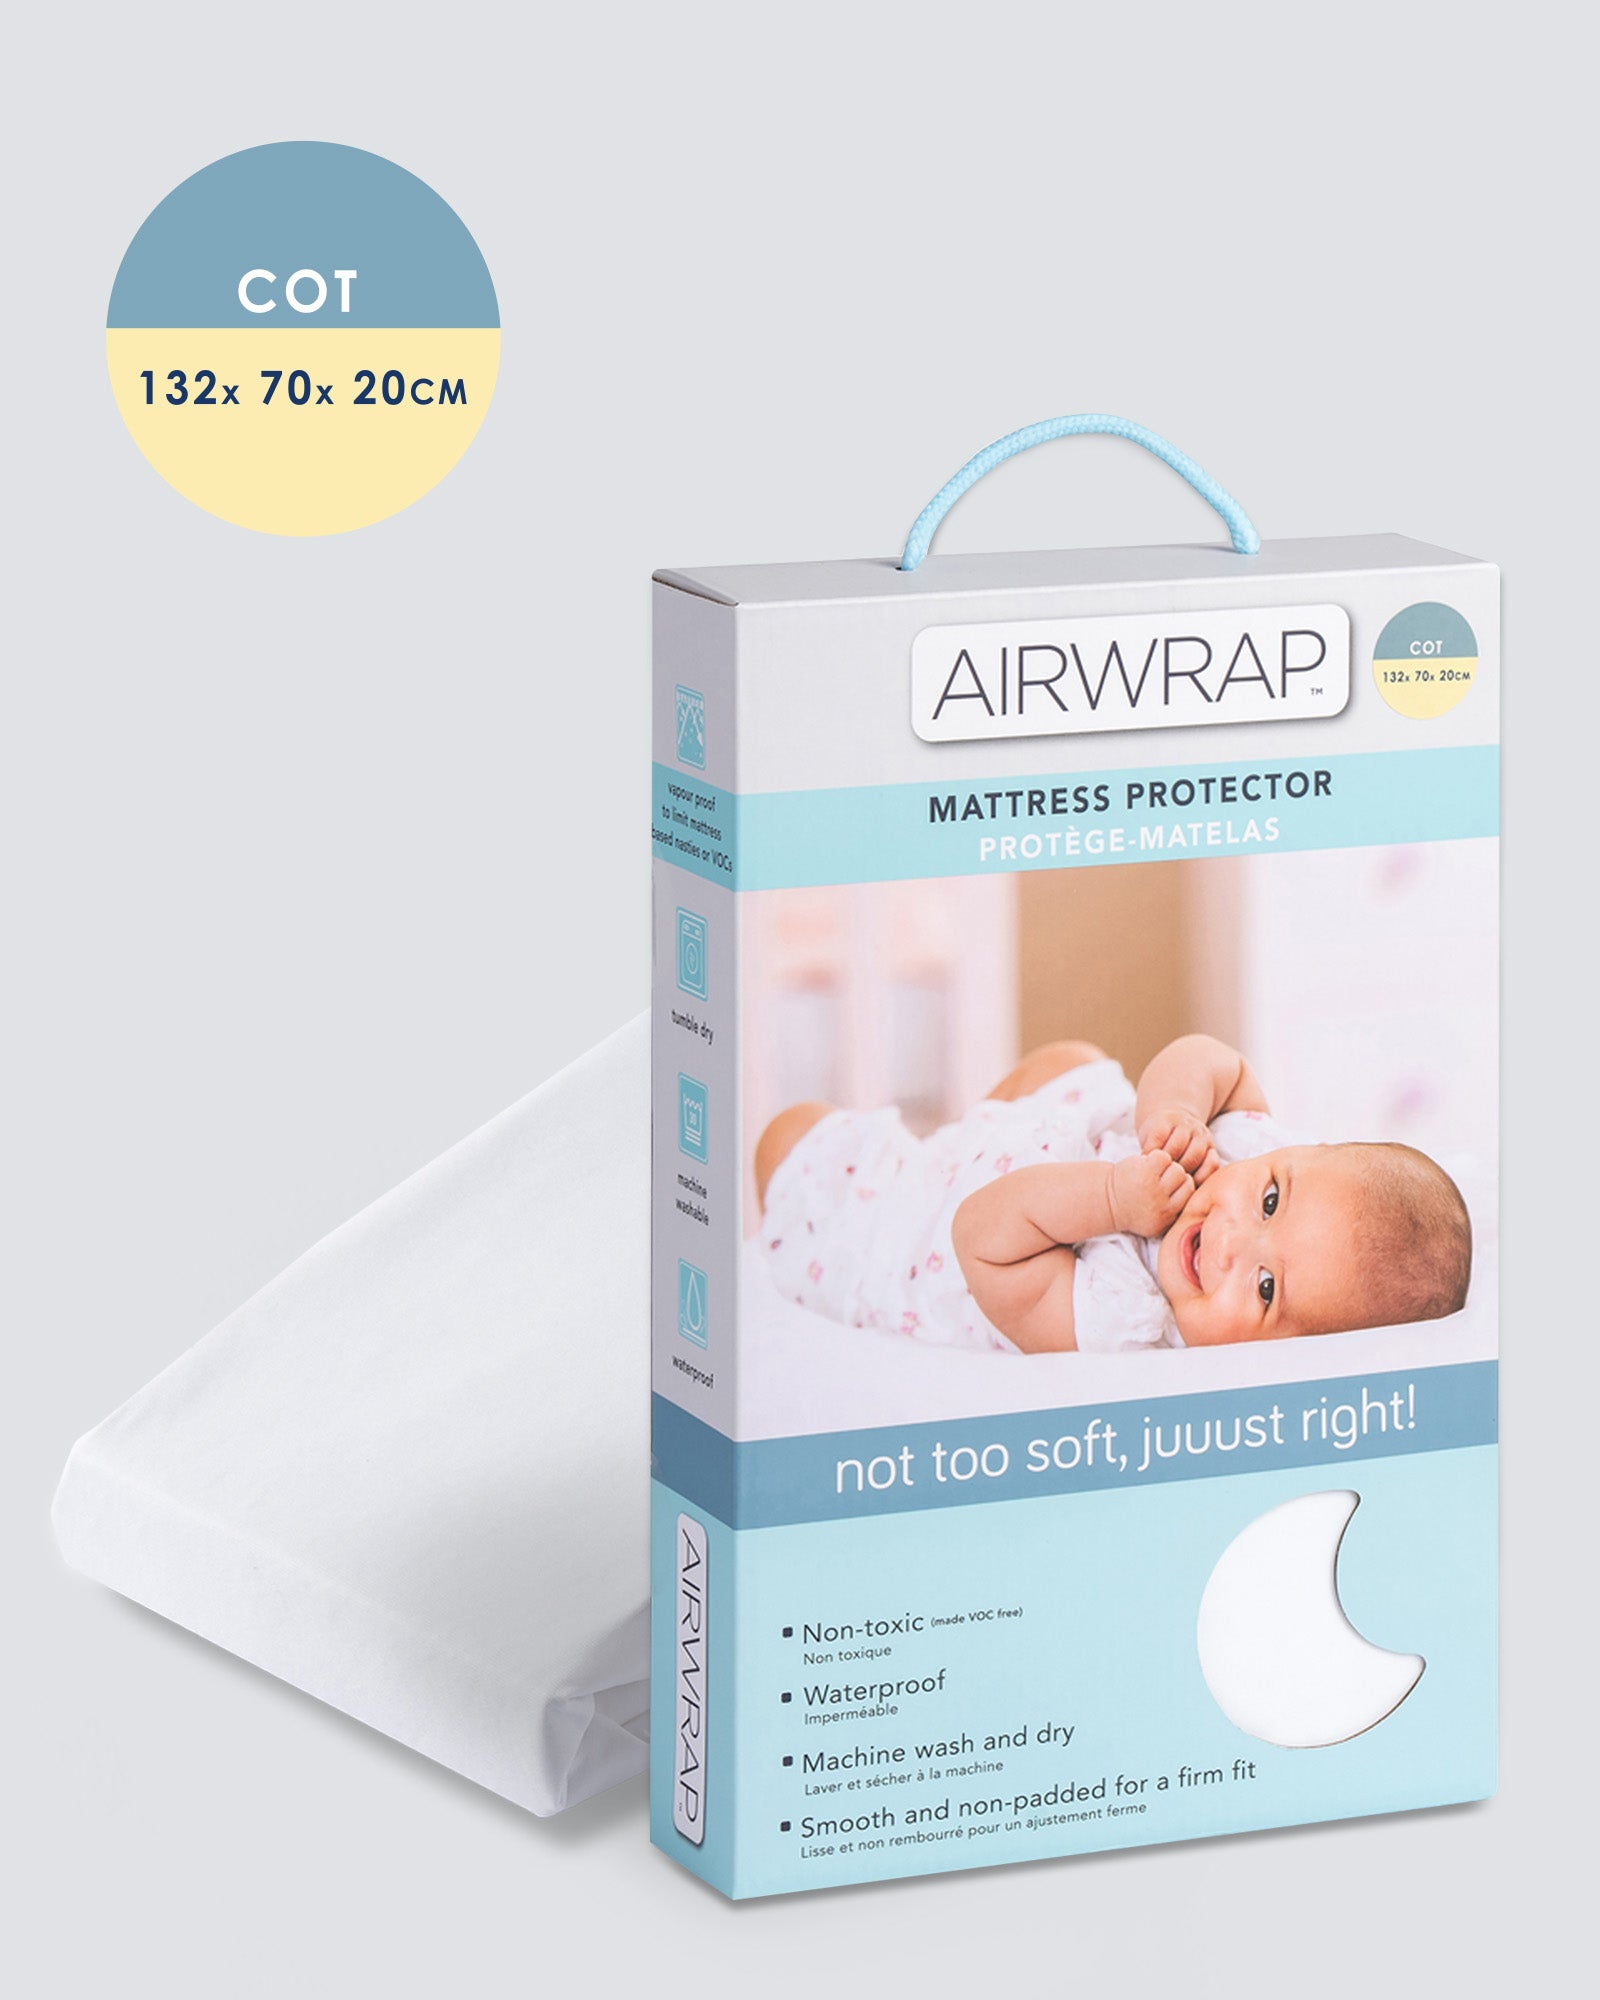 Airwrap Mattress Protector Cot pack prduct